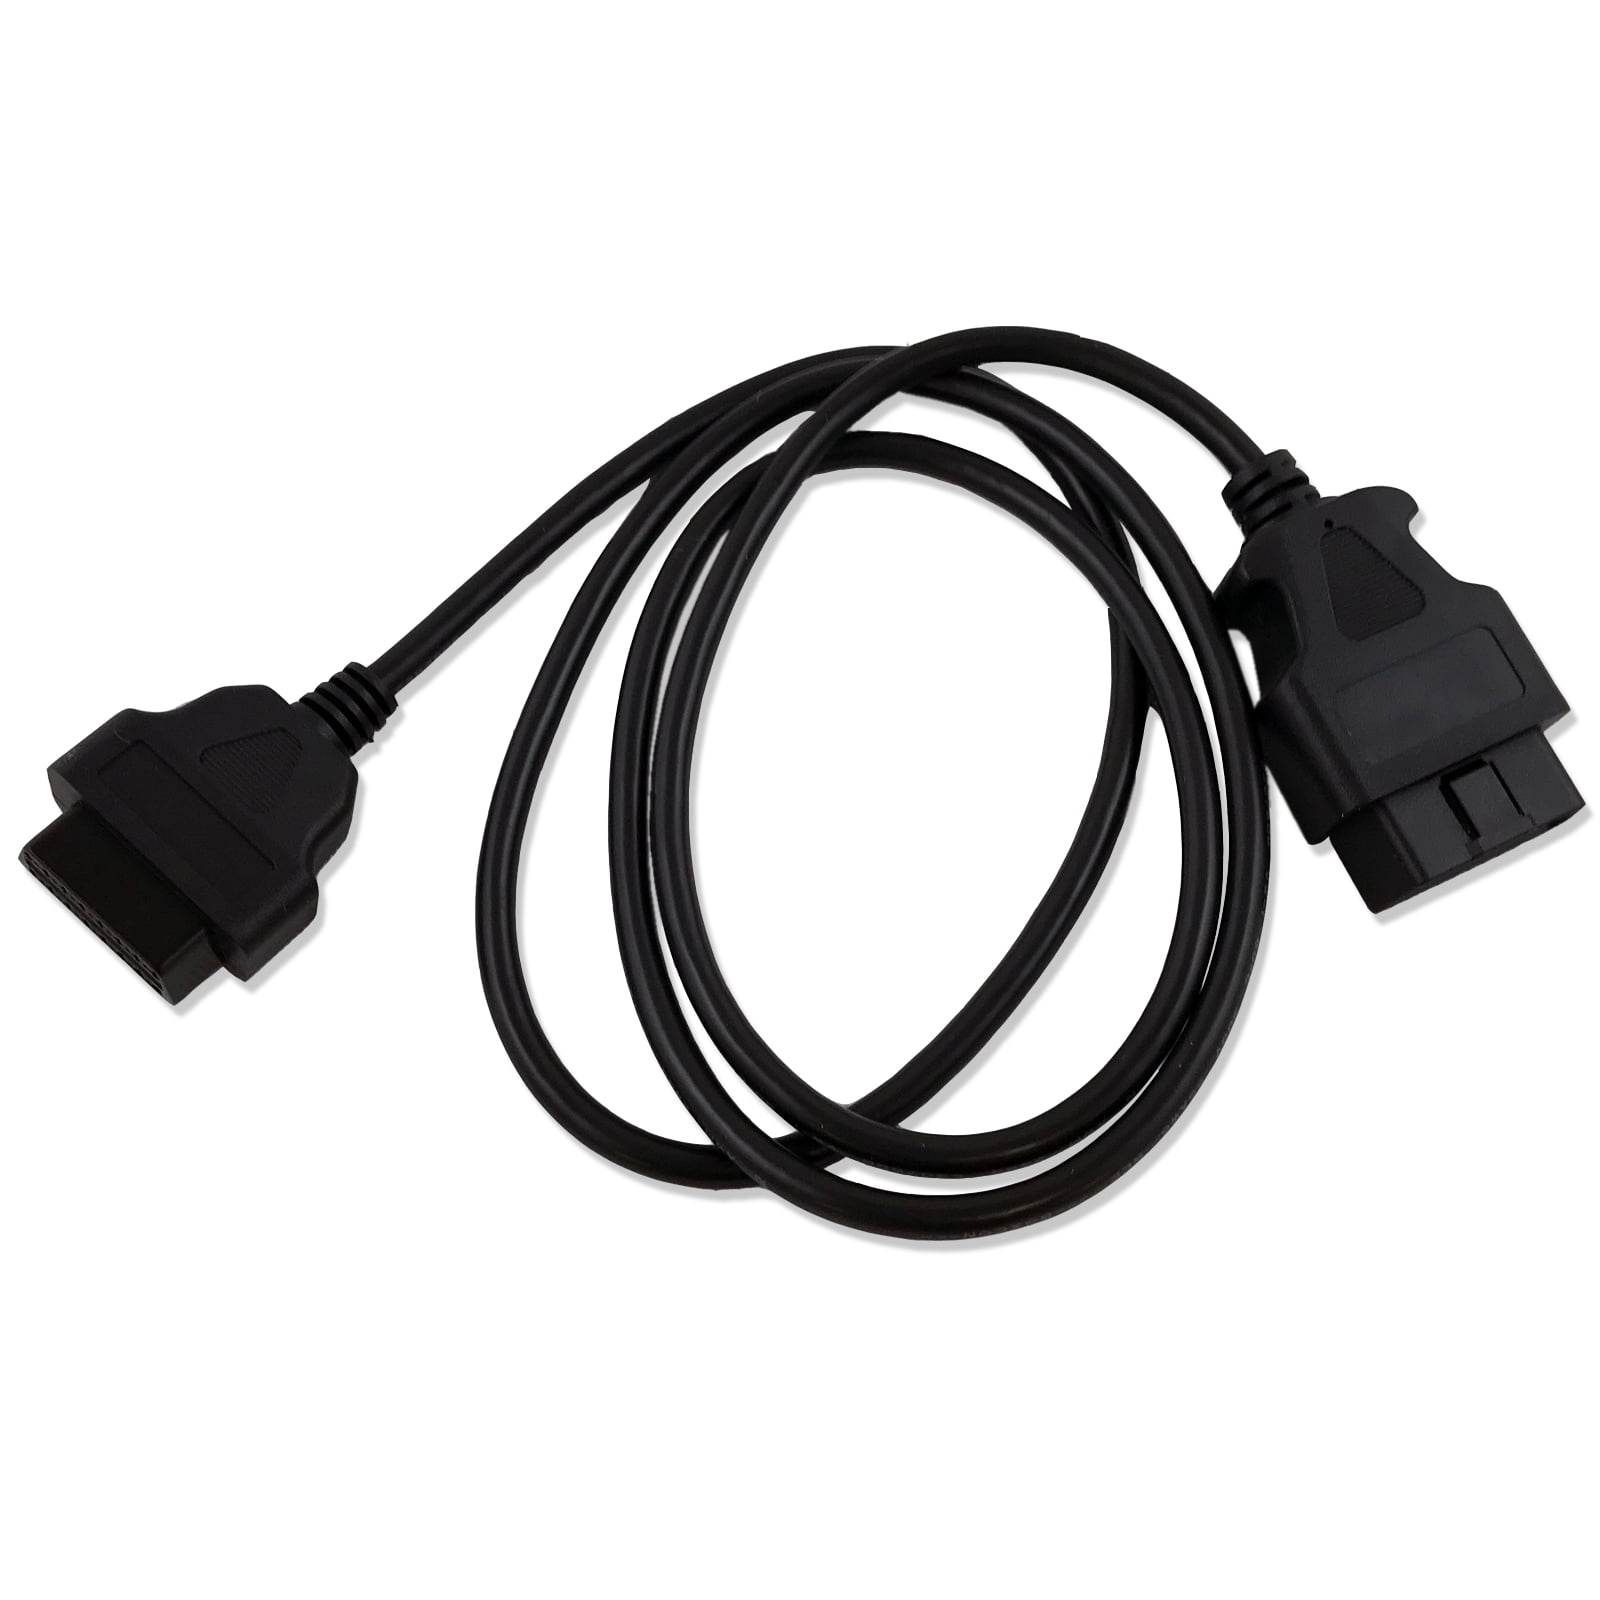 25cm OBD 2 16 Pin Female to 16 Pin Male Extender Cable Black 